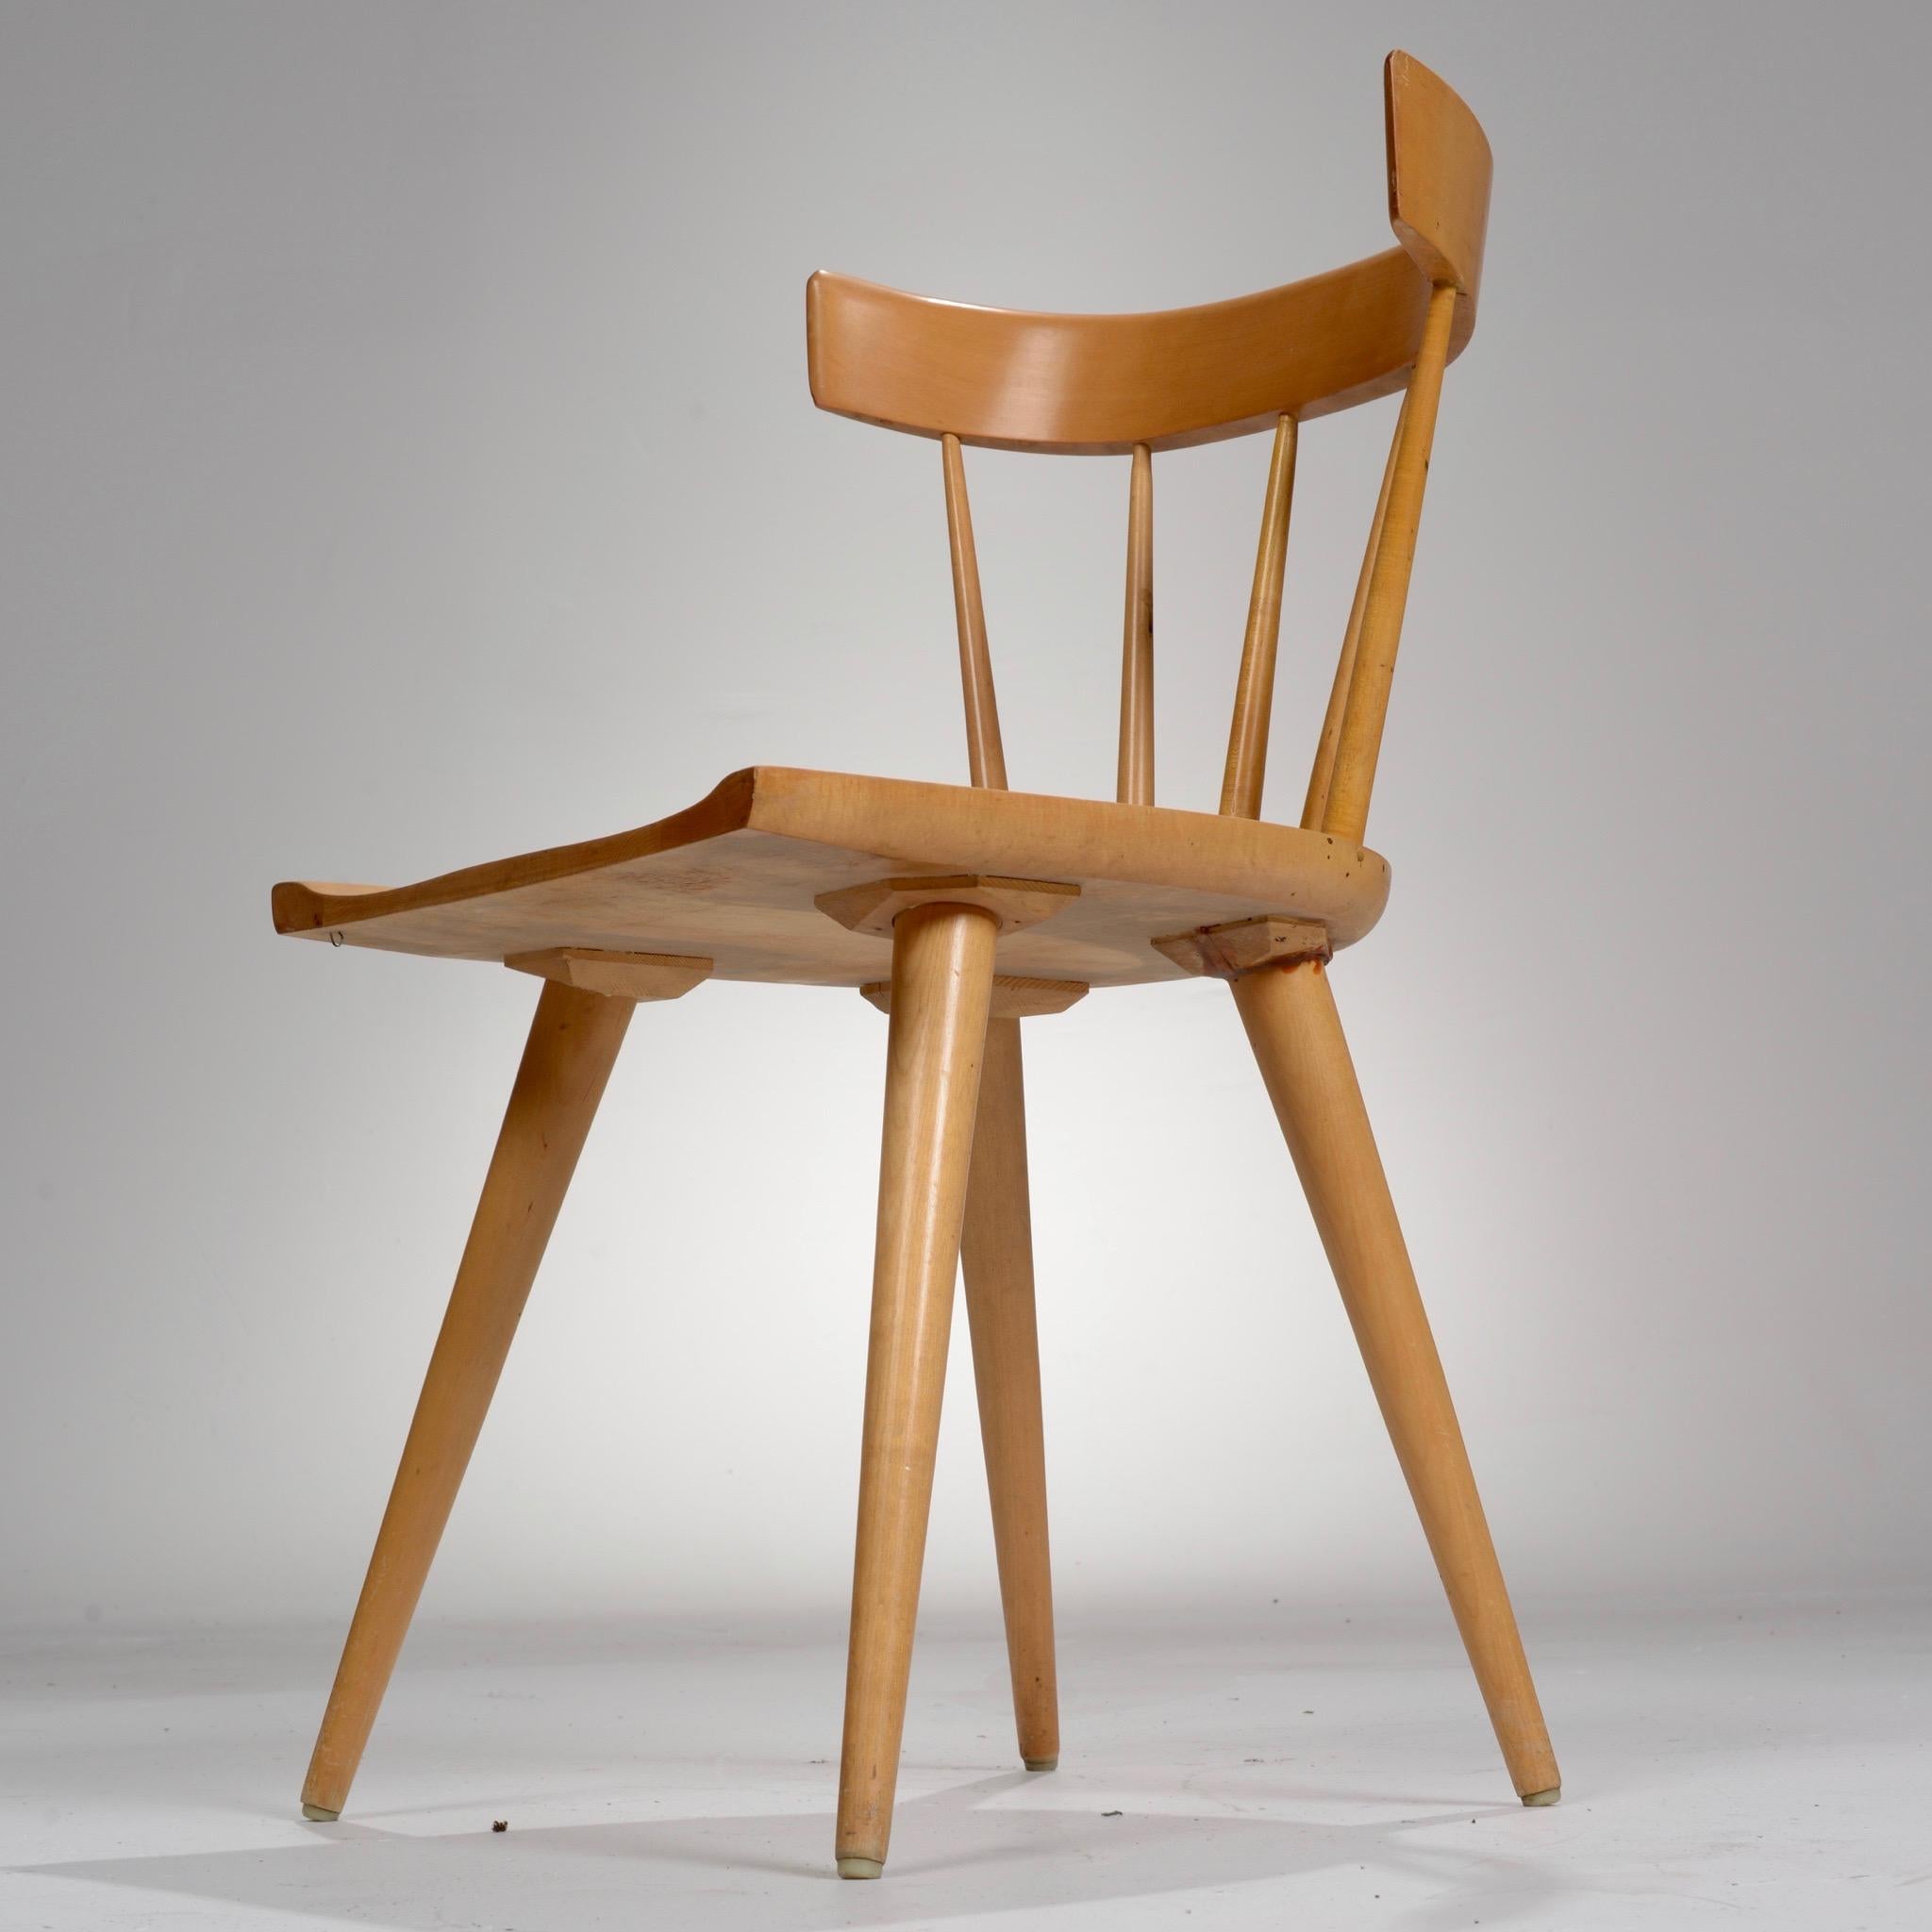 Maple spindle back dining chair from the Planner Group series designed by Paul McCobb and manufactured by Winchendon, Massachusetts. The seat rests atop four tapered legs and is inlaid with four oversize wooden screw motifs.

  